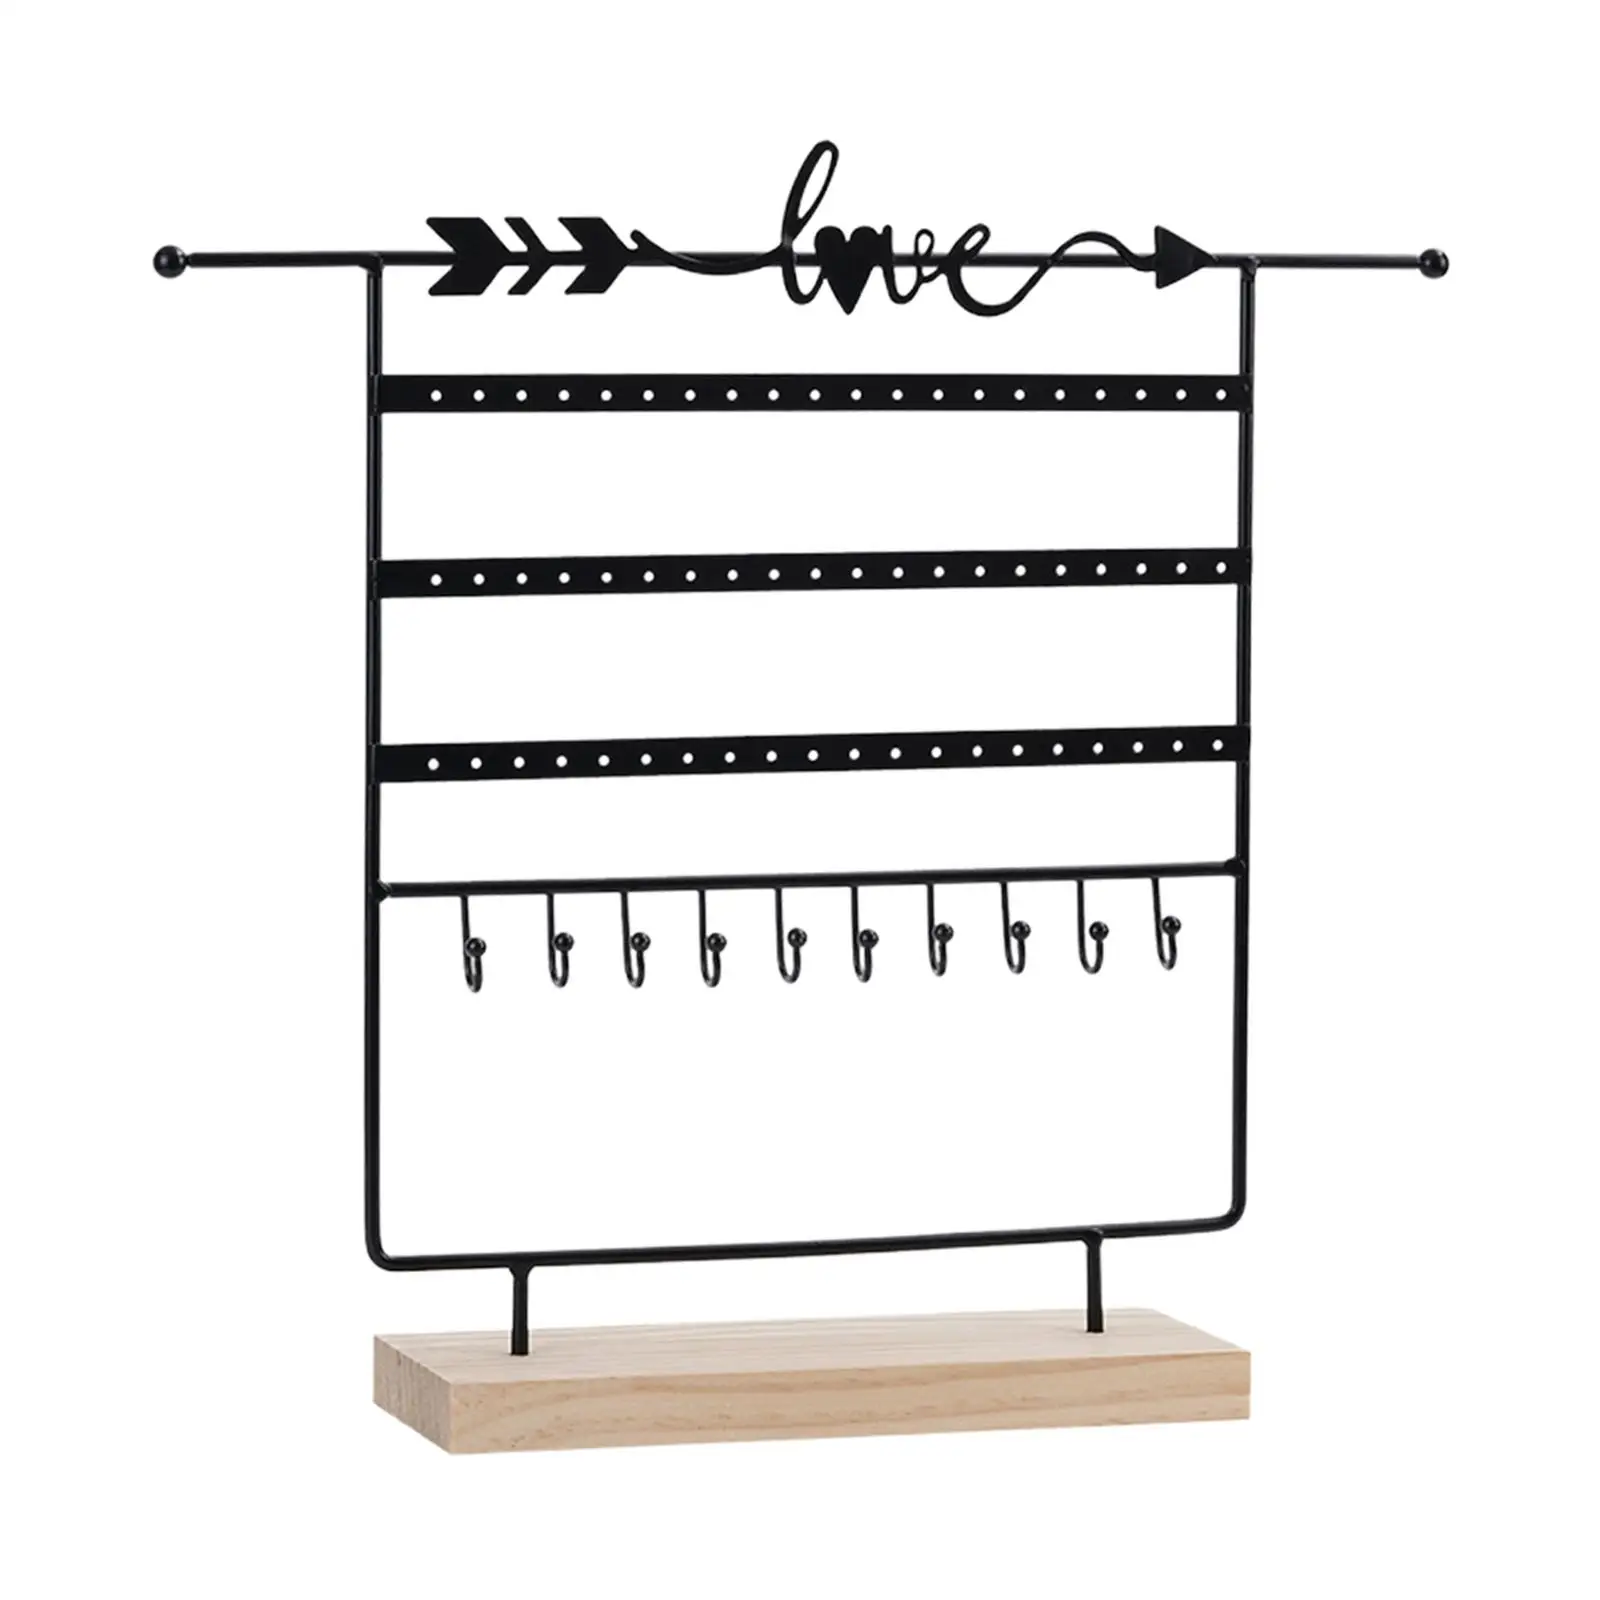 5 Tiers Jewelry Earring Organizer Holder Decoration with Wooden Base Iron for Pendants Dresser Bracelet Countertop Necklace